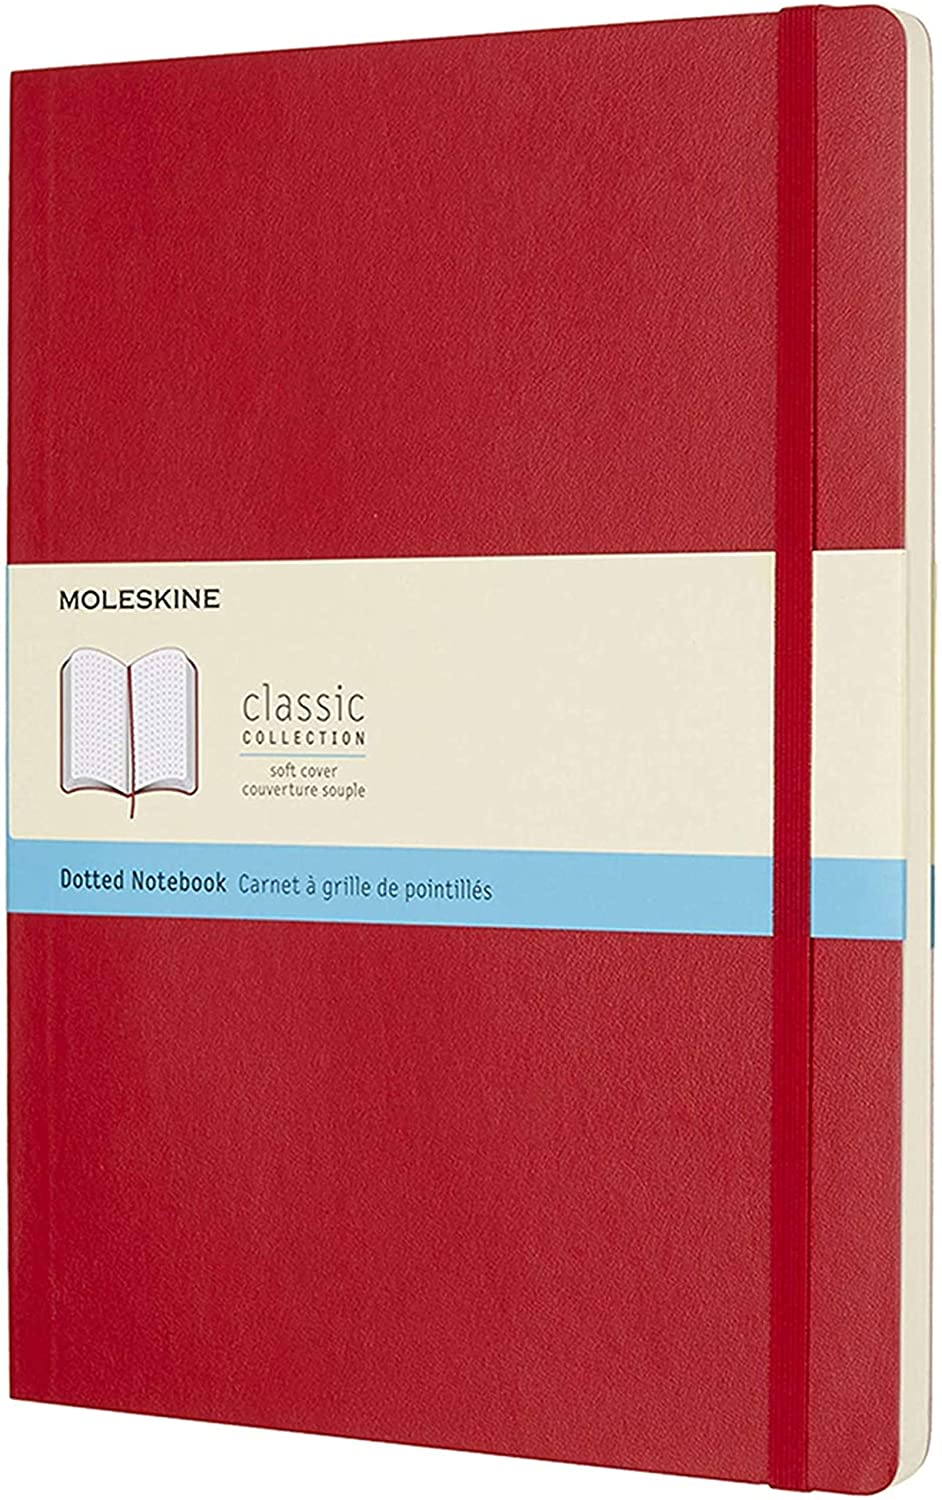 Carnet - Moleskine - Classic Dotted Softcover Notebook XL - Scarlet Red | Moleskine